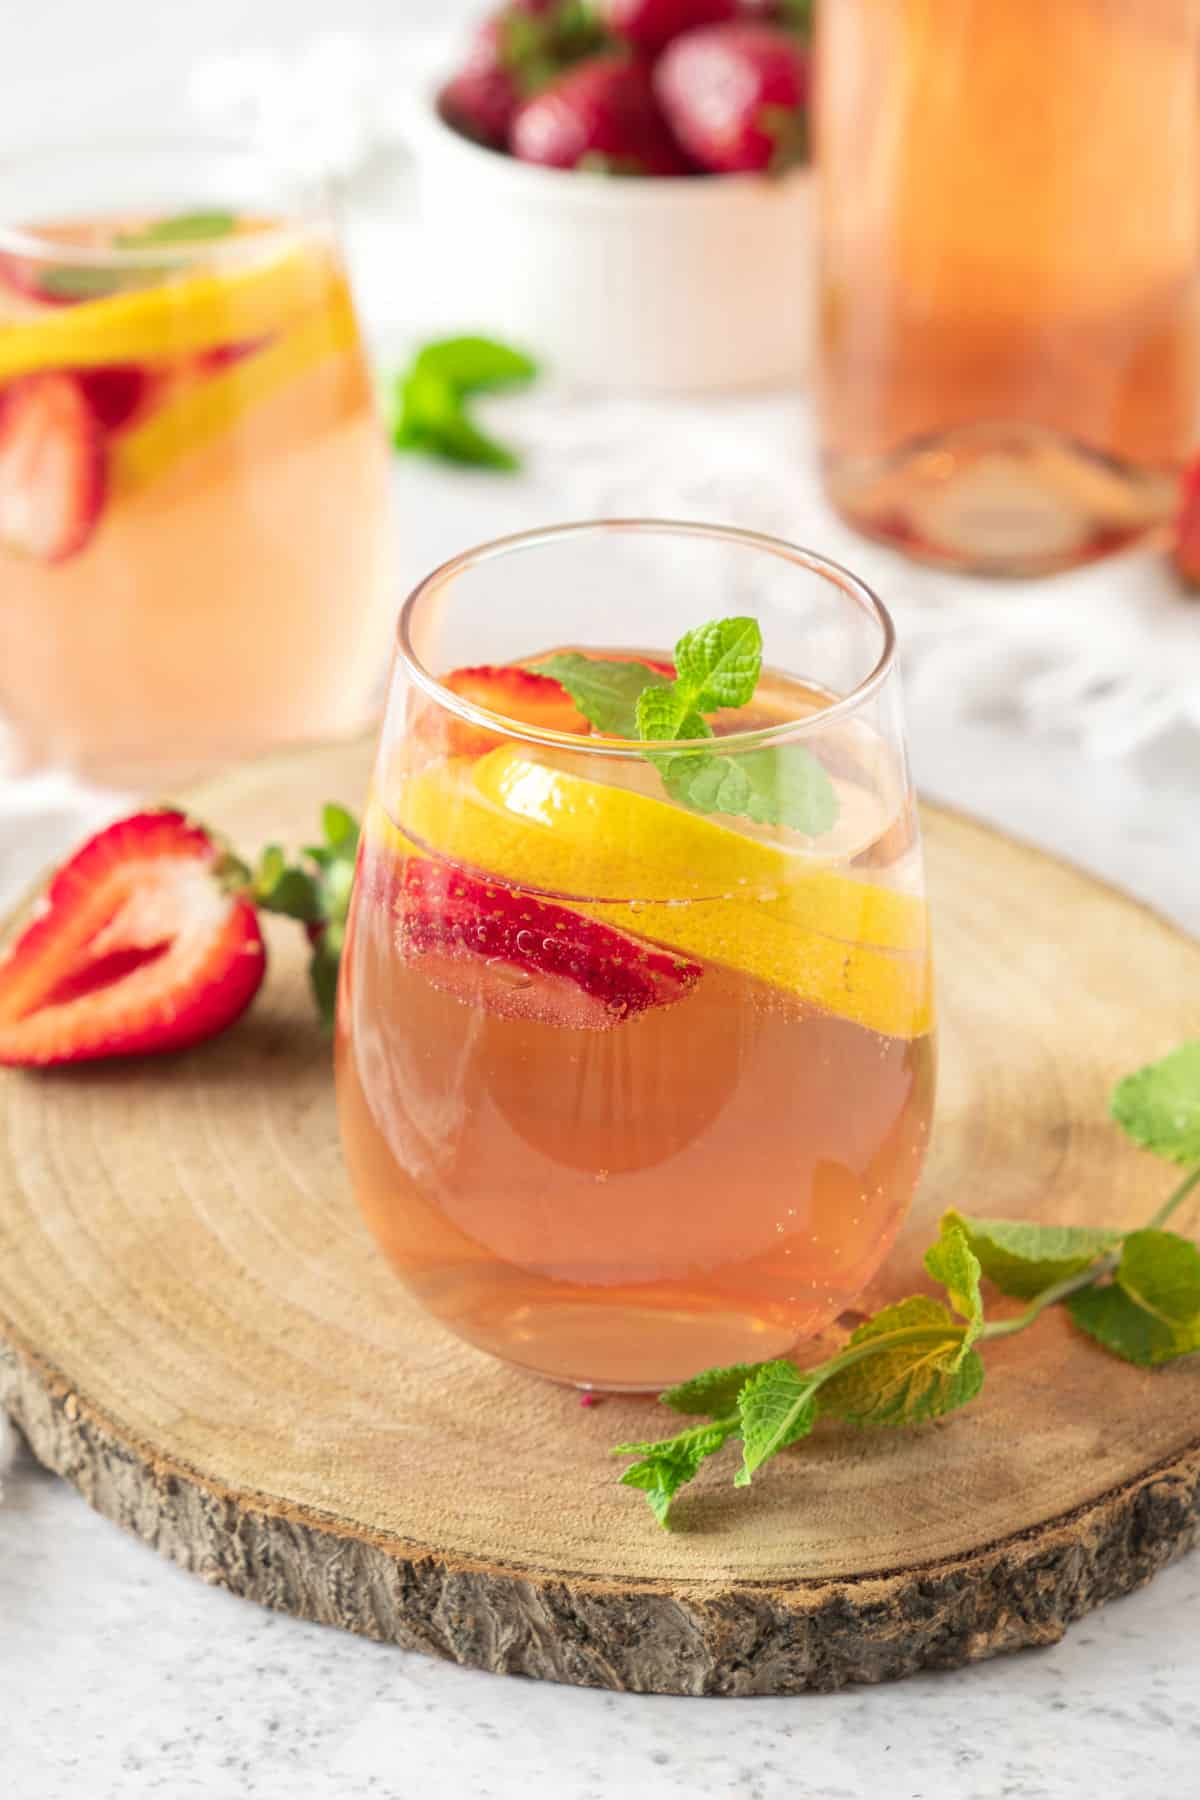 Round wood board with glasses of rose sangria with strawberries and orange slices. Mint leaves, bowl with berries, pitcher. 